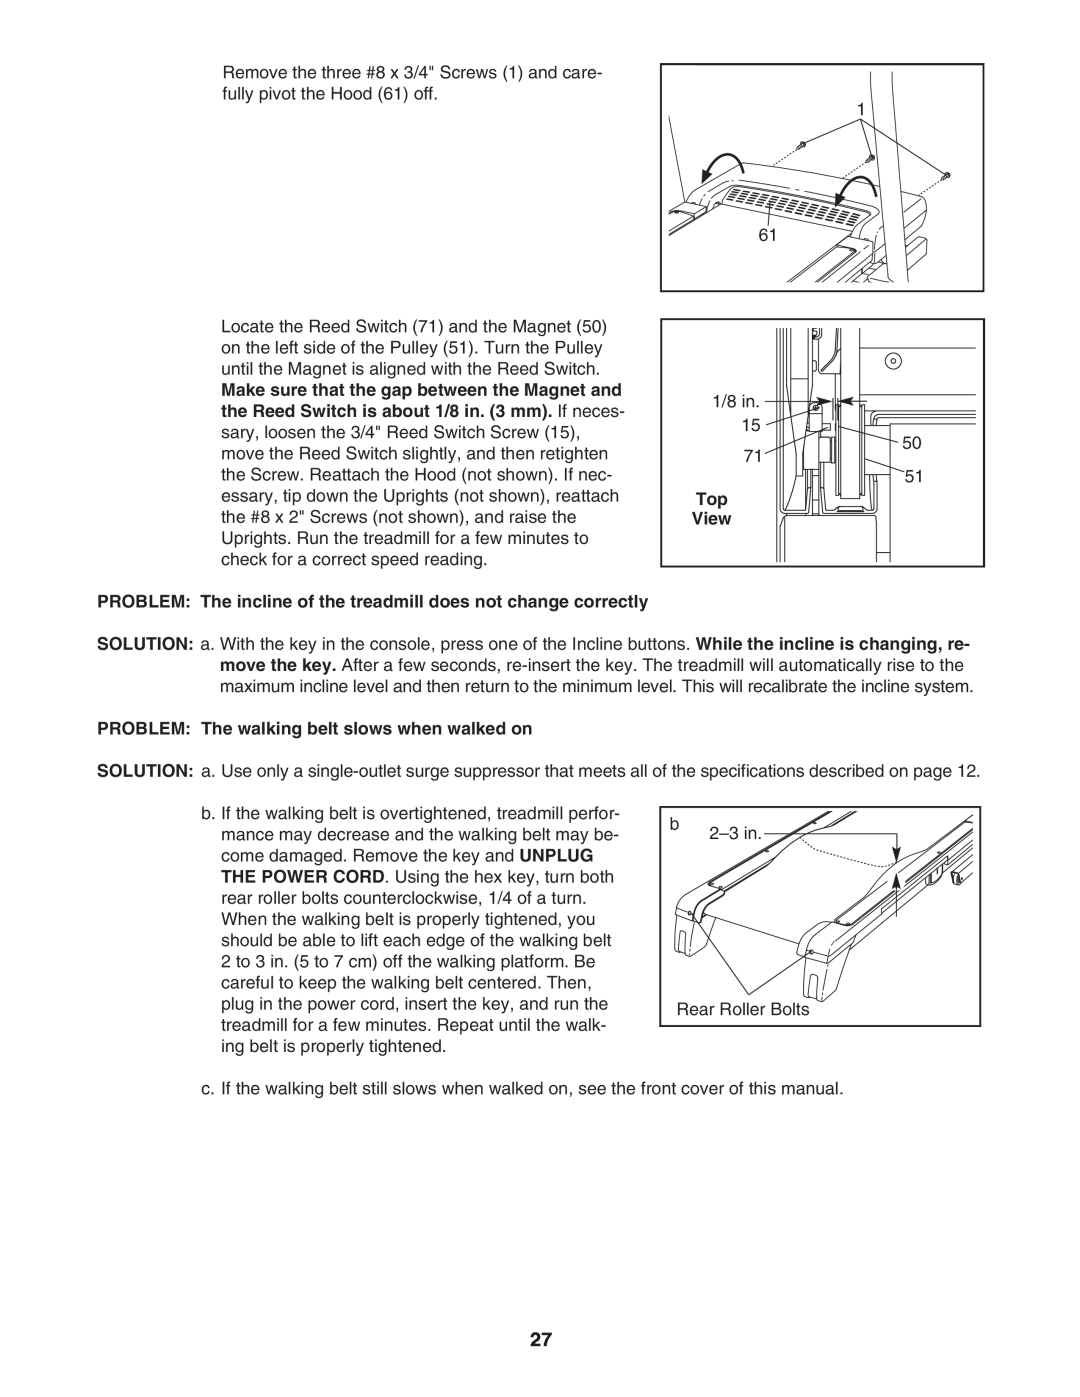 NordicTrack NTL09007.0 user manual PROBLEM The incline of the treadmill does not change correctly 